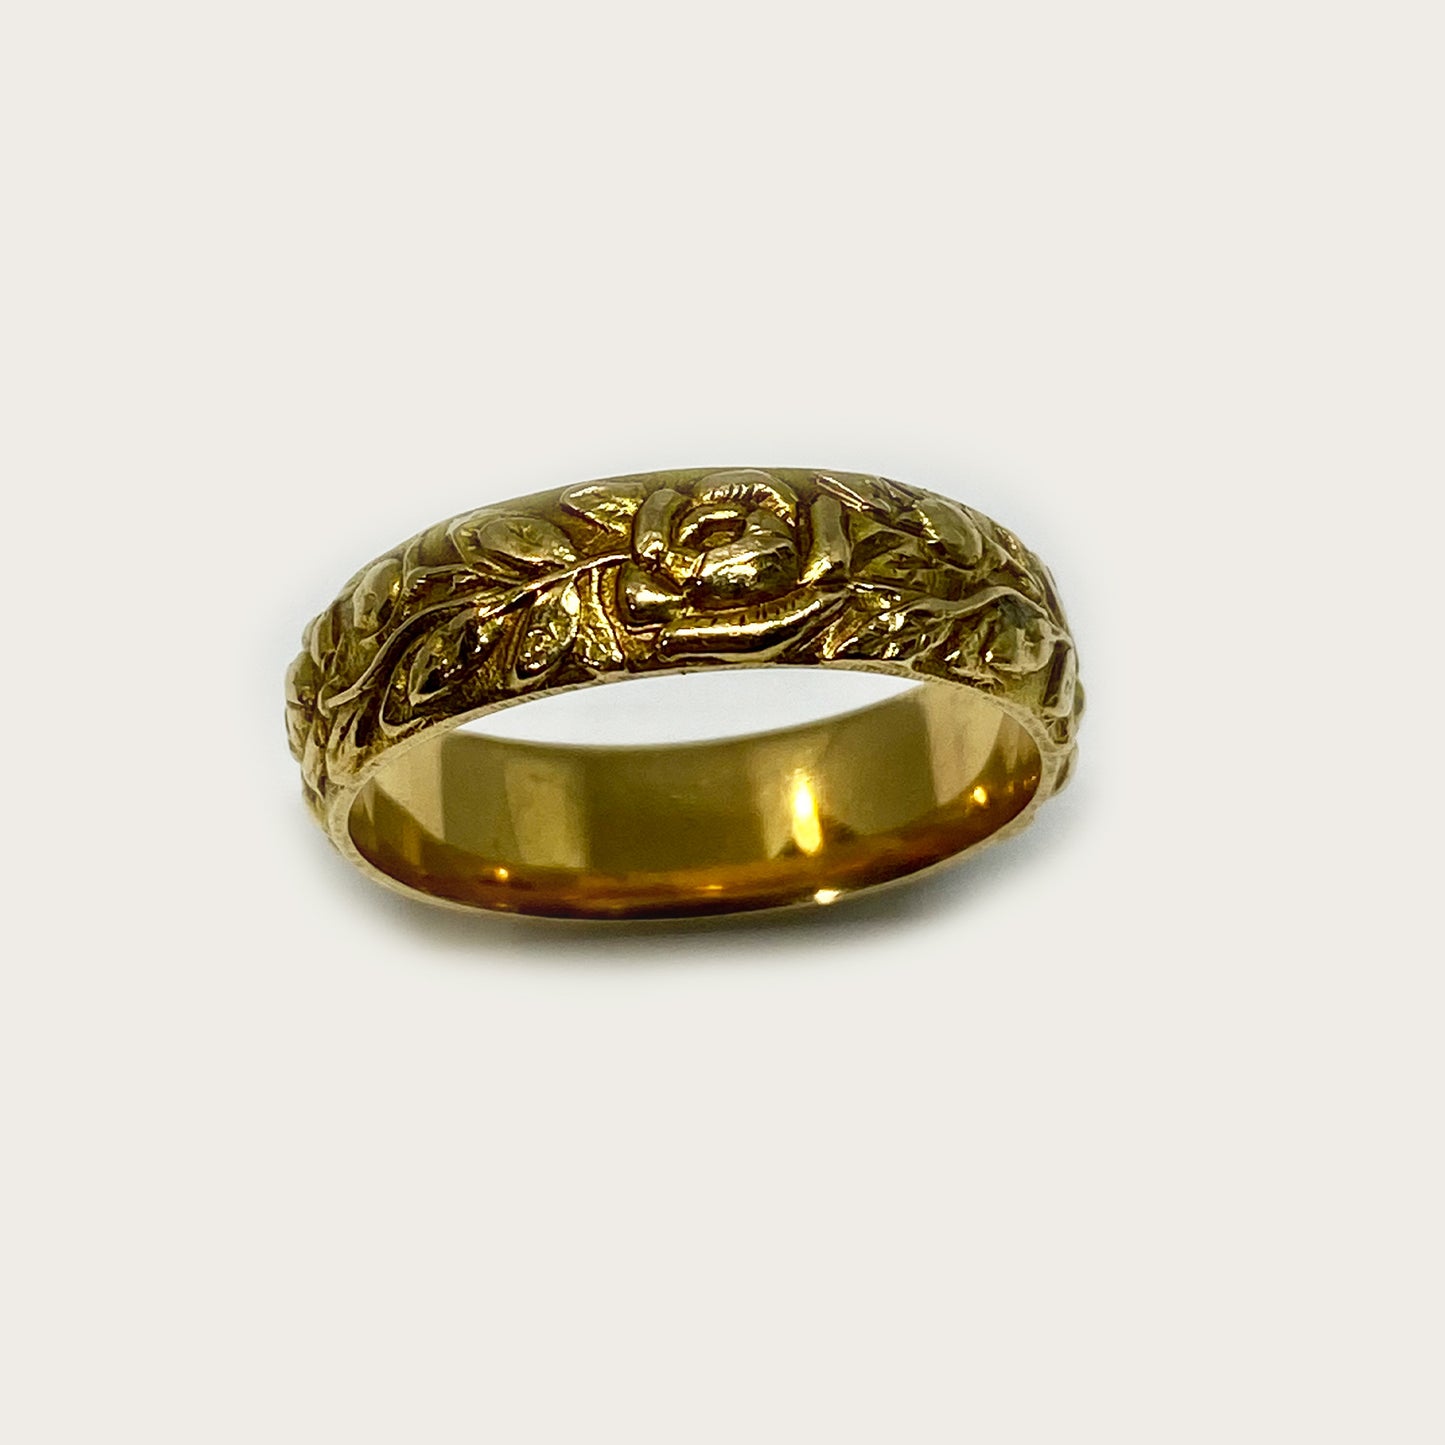 Antique 18k Gold Chased Floral Ring, Victorian Romantic 18 ct Gold Wedding Band Ring